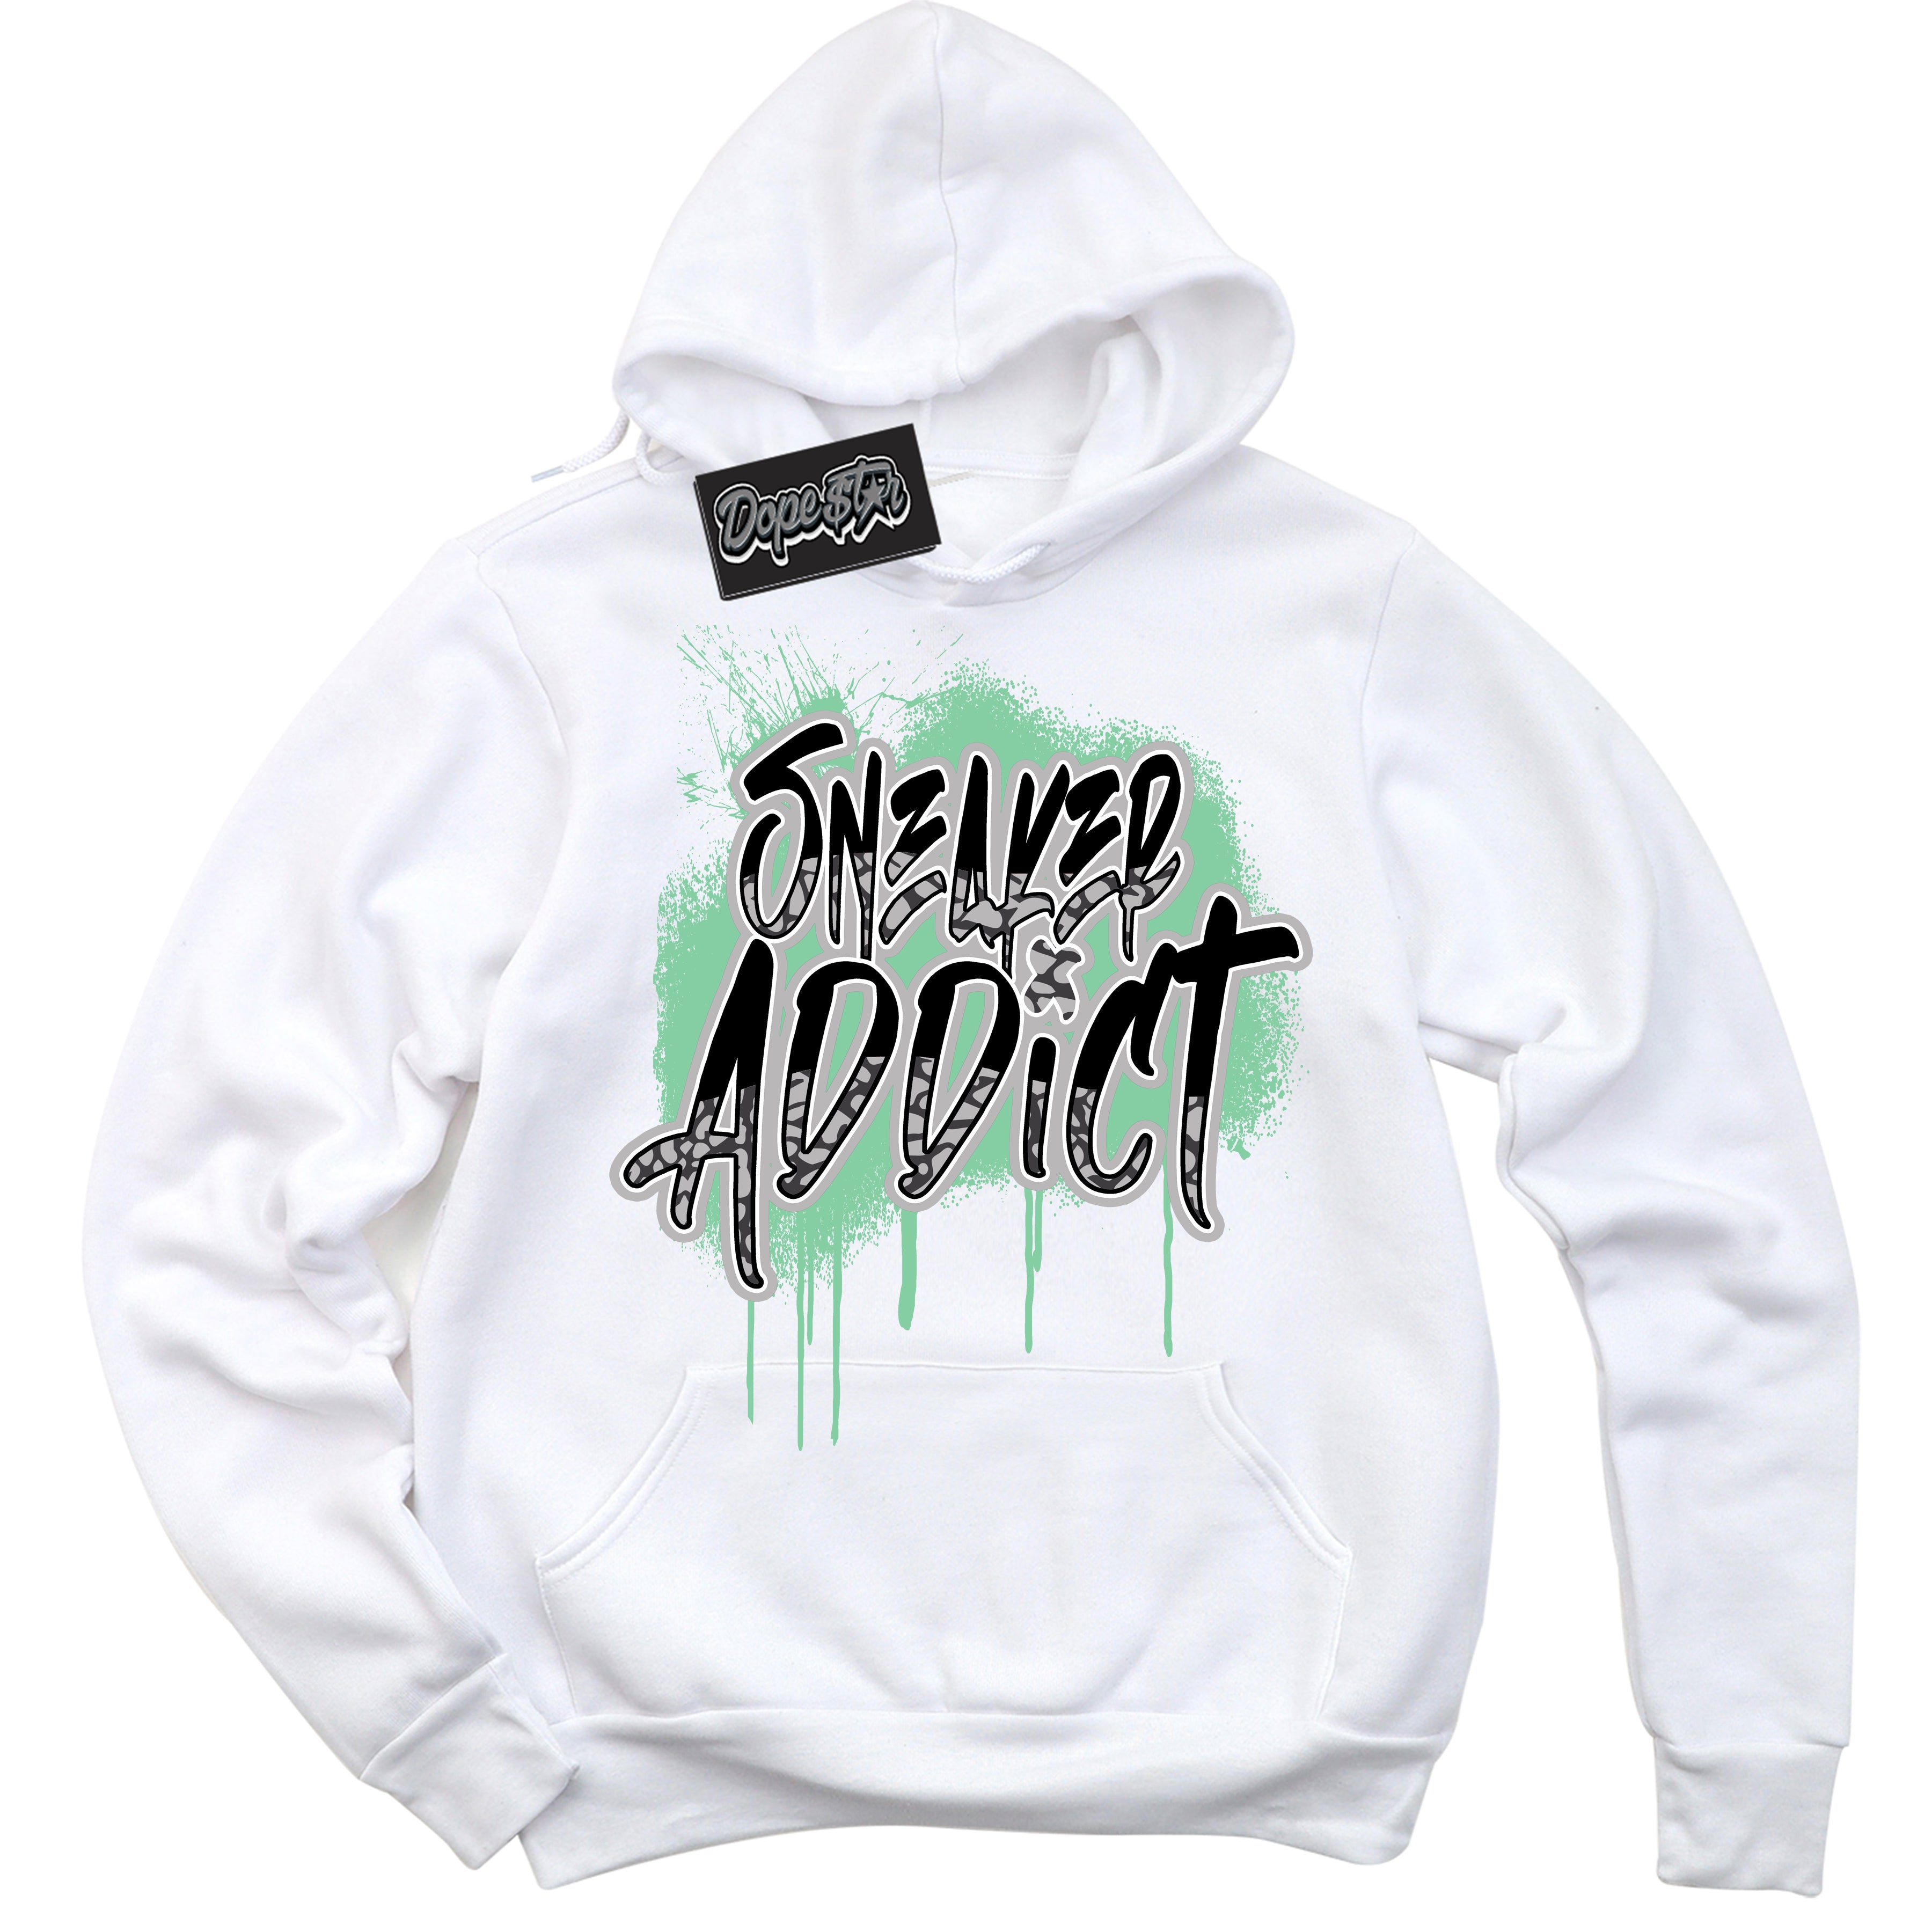 Cool White Graphic DopeStar Hoodie with “ Sneaker Addict “ print, that perfectly matches Green Glow 3s sneakers